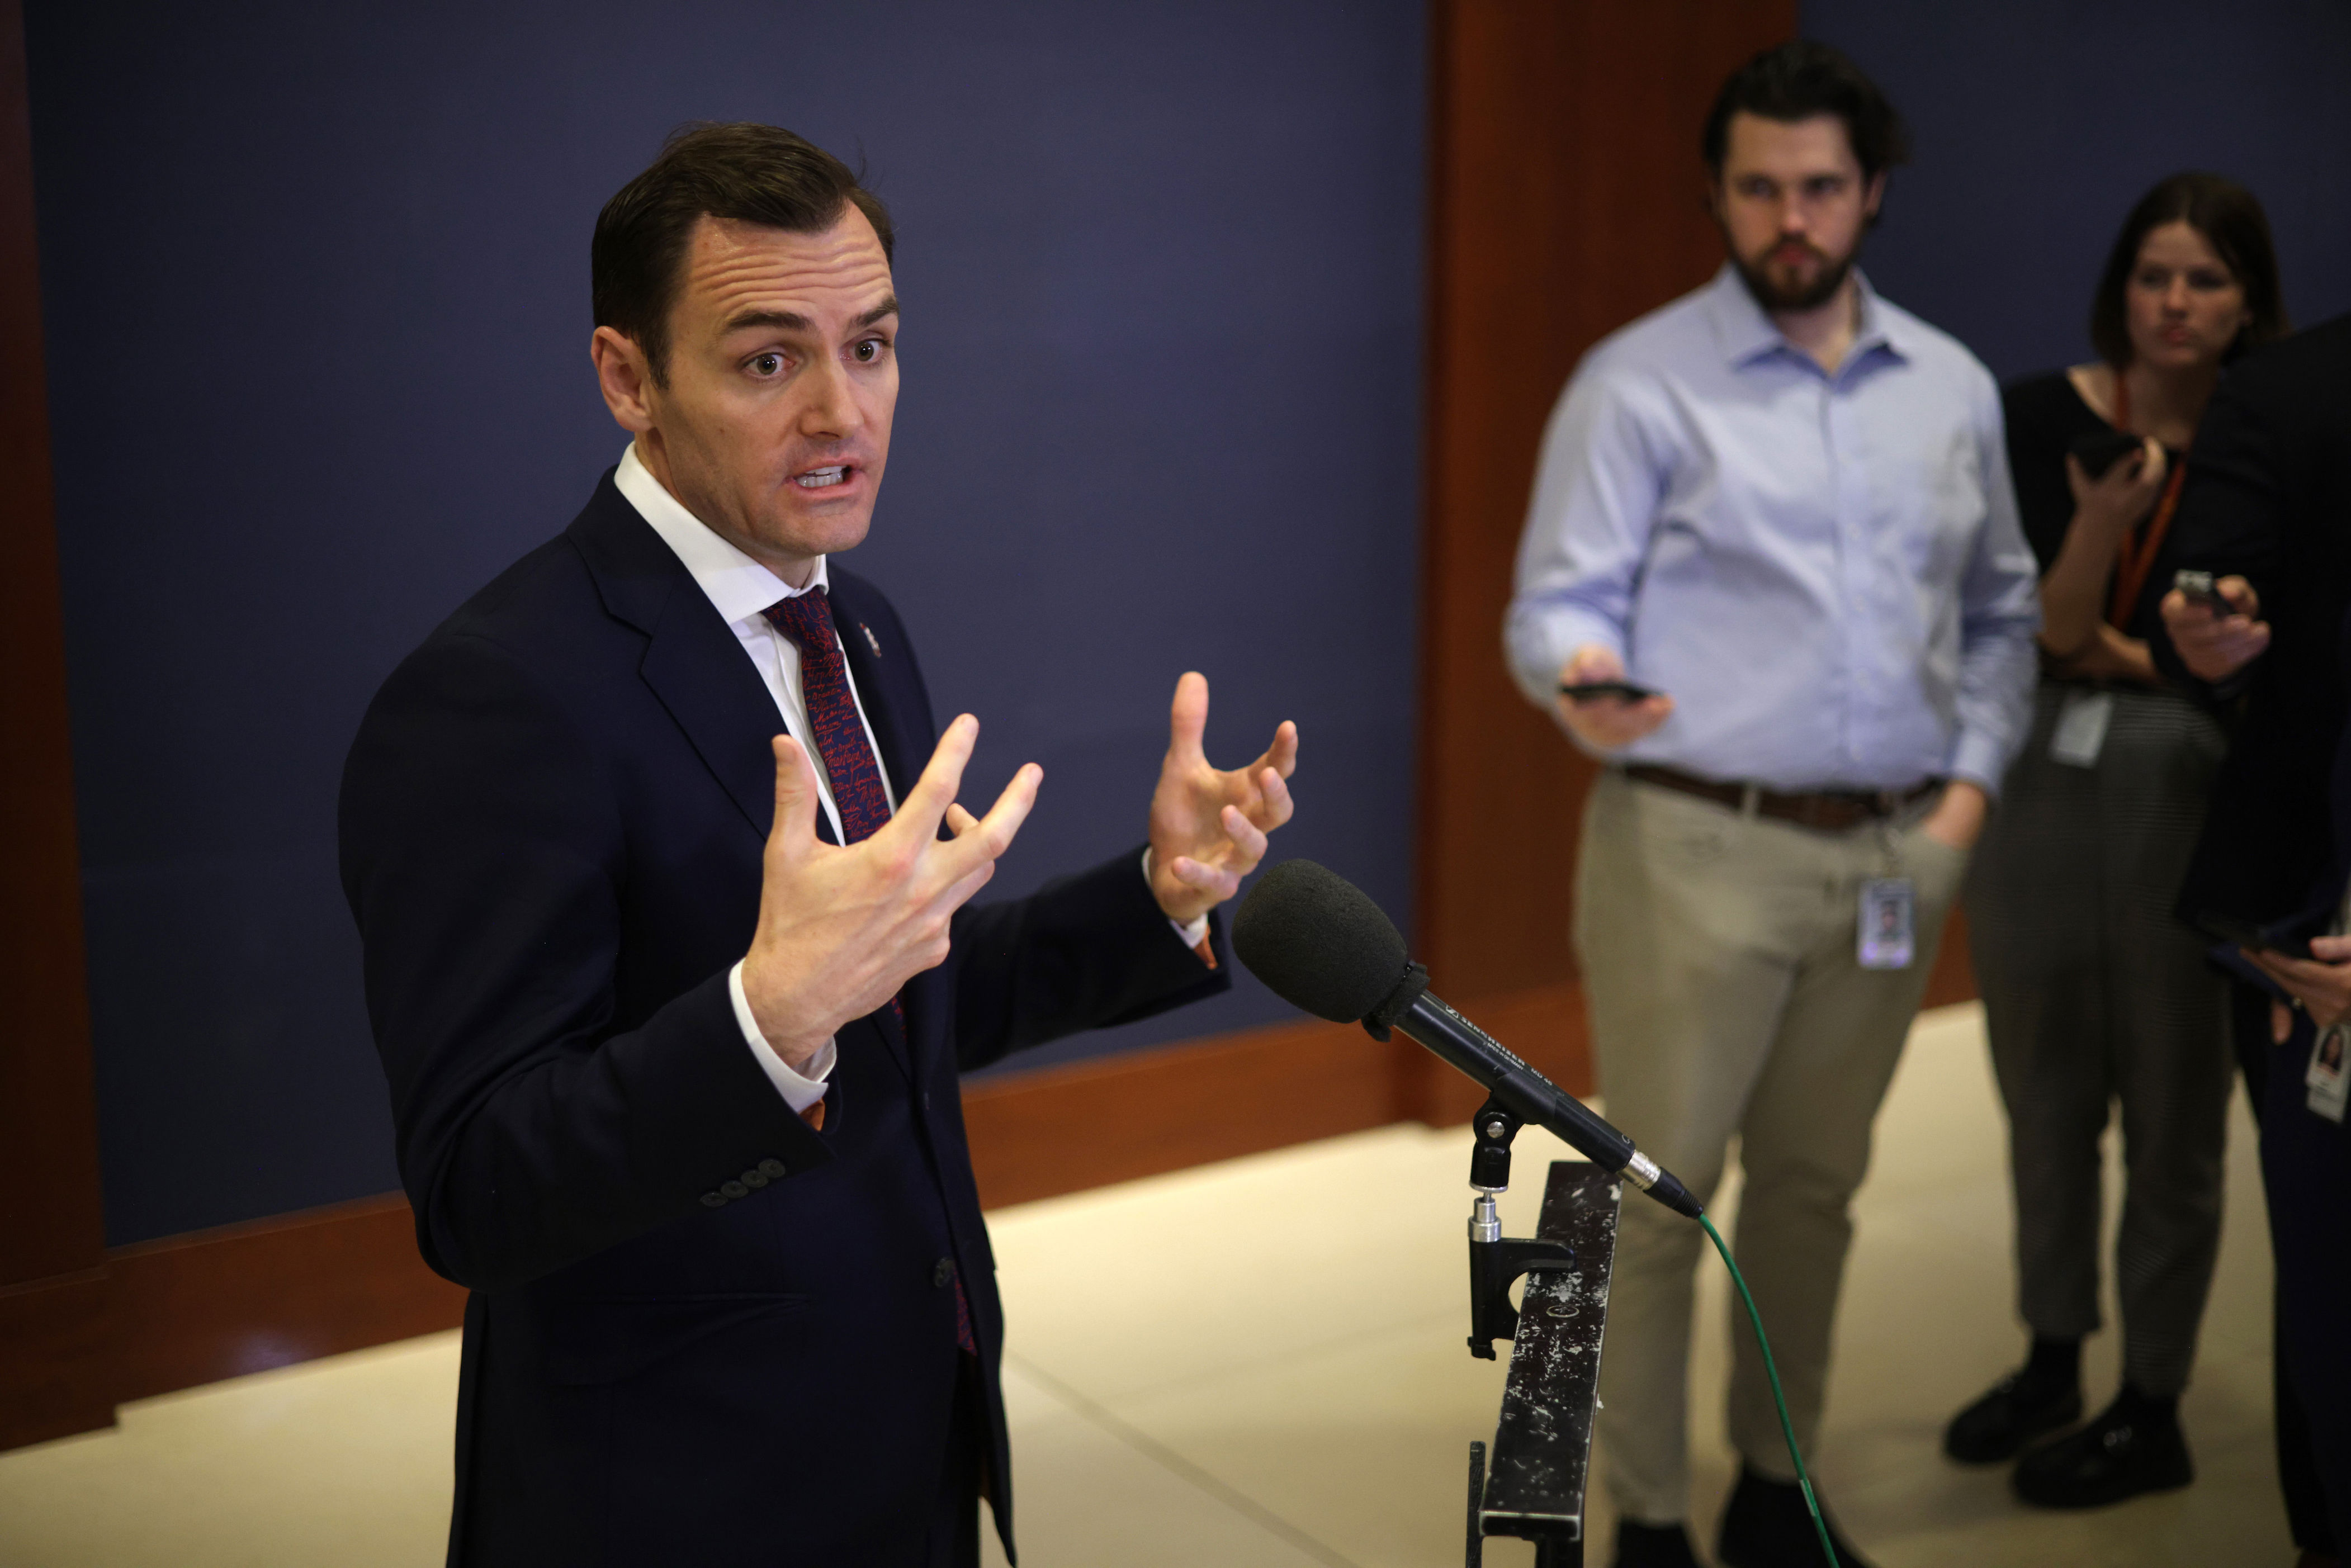 wisconsin congressman mike gallagher hints death threats may be behind his early resignation